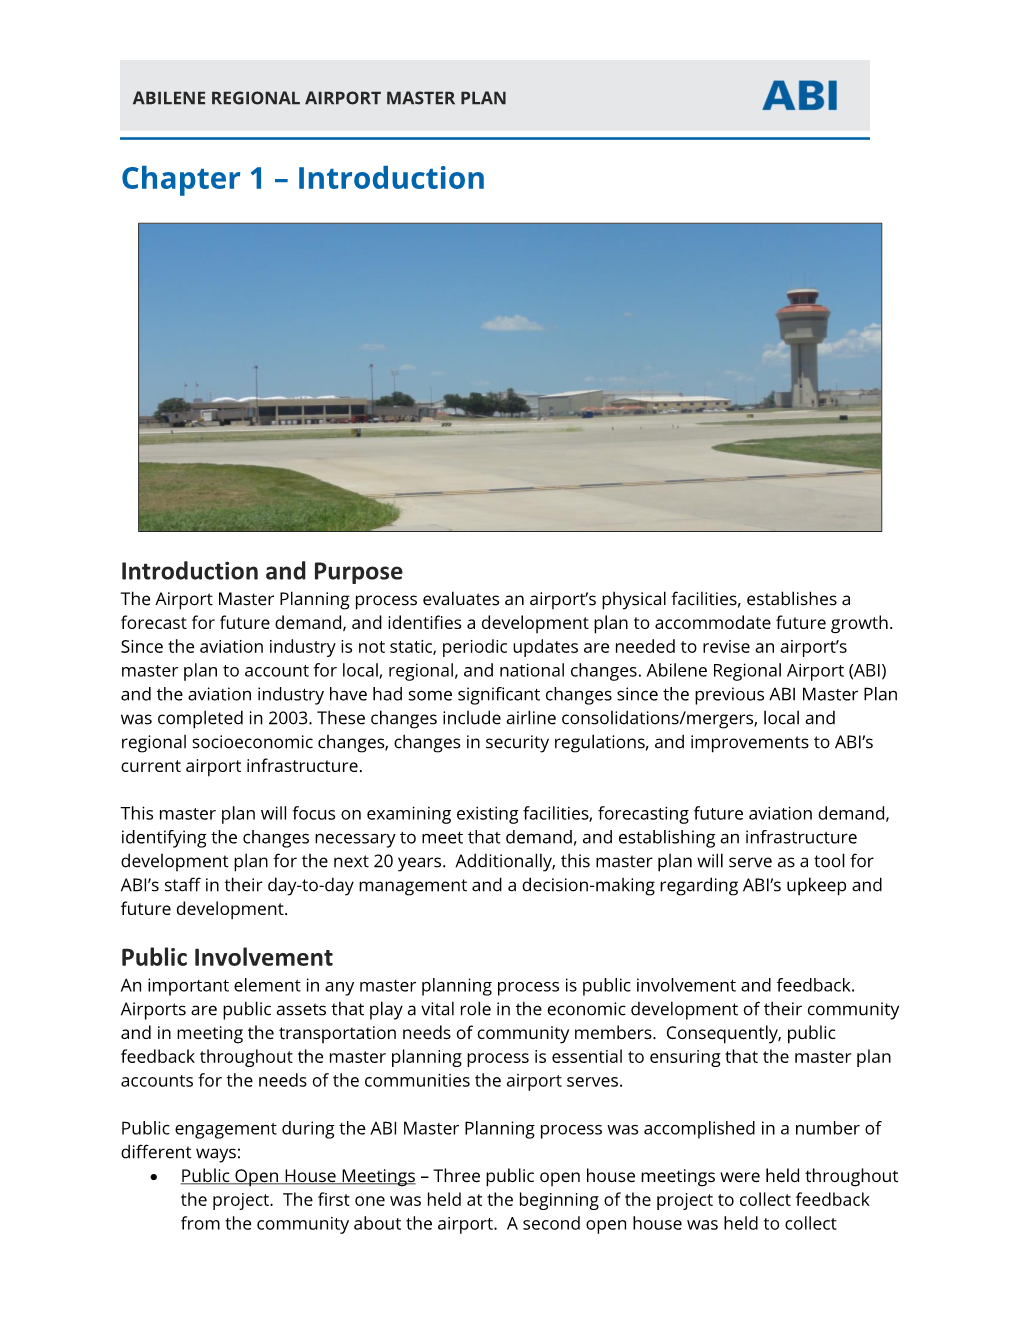 Chapter 1 – Introduction